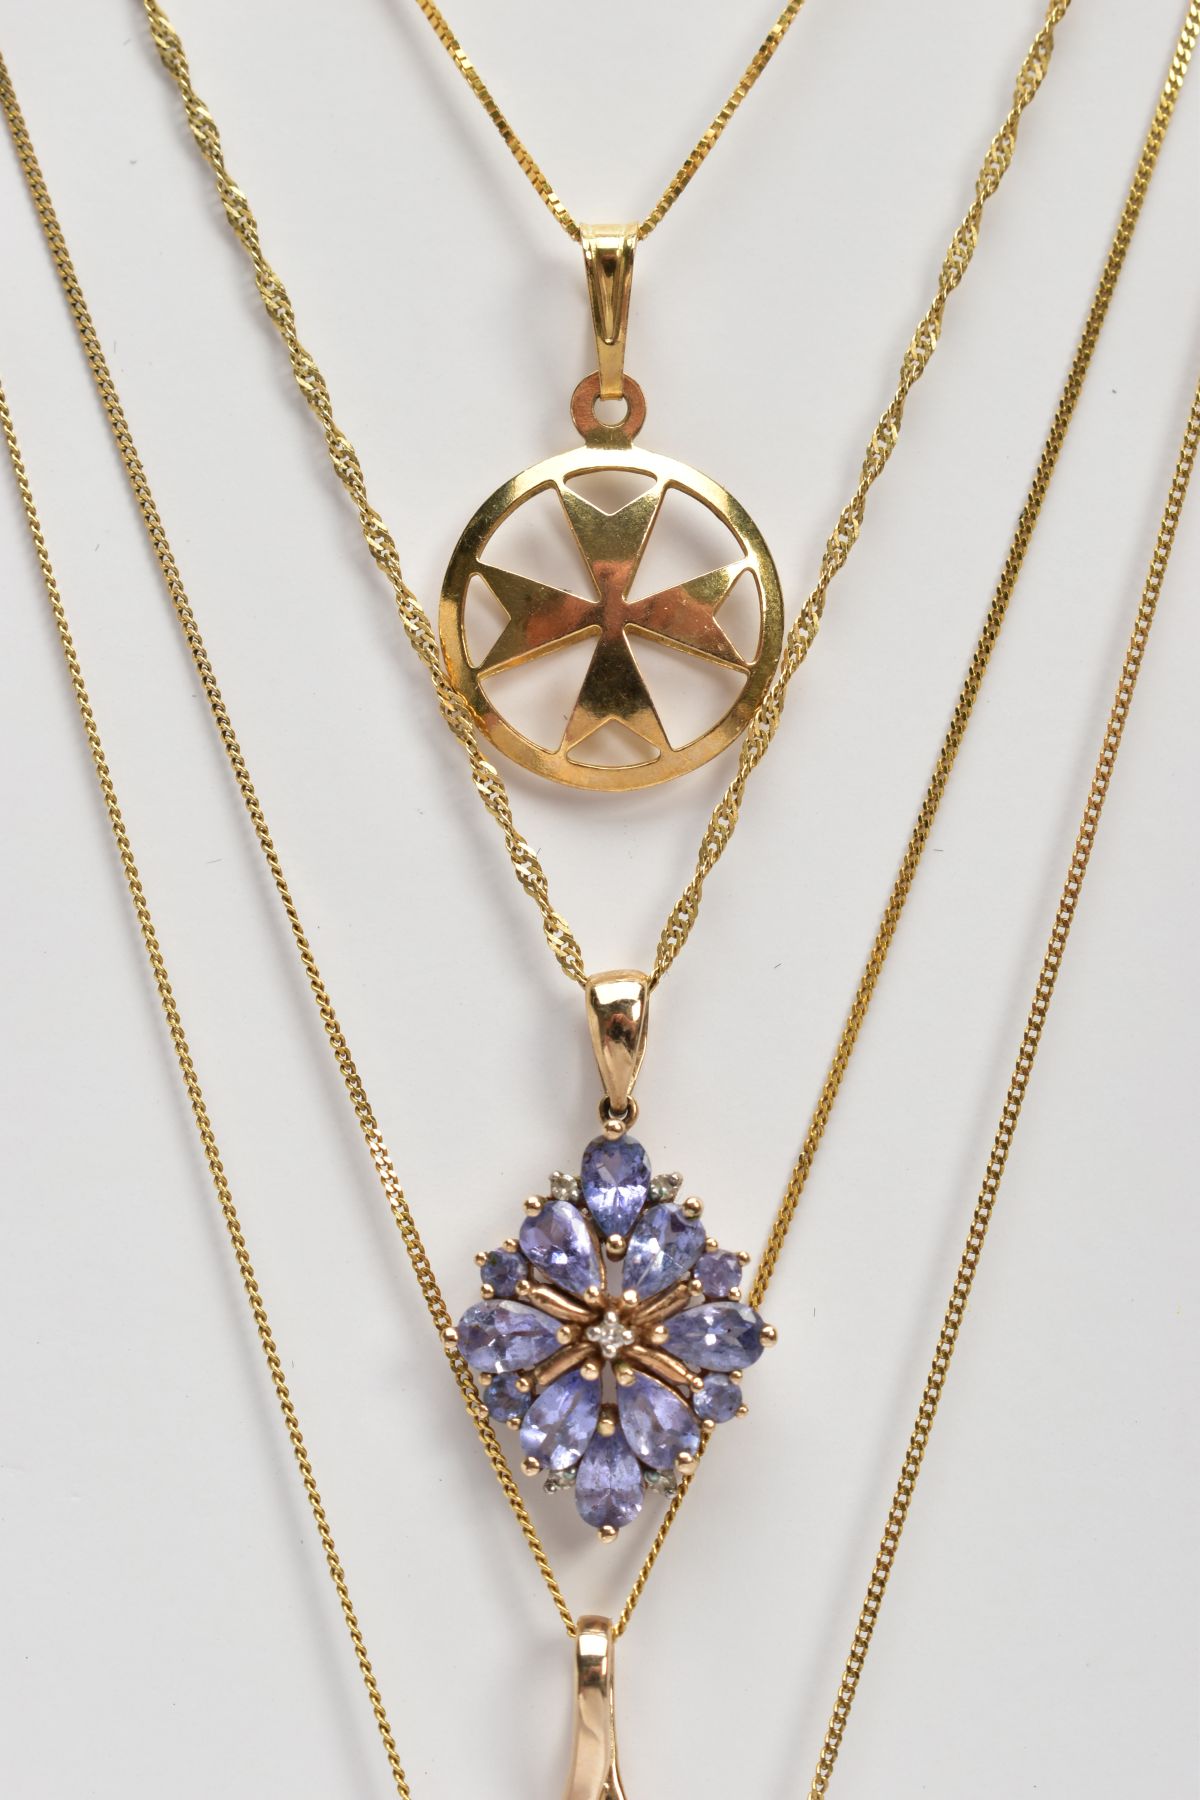 THREE 9CT GOLD GEM SET PENDANT NECKLACES AND A GOLD PENDANT NECKLACE, the gem set pendants set - Image 3 of 4